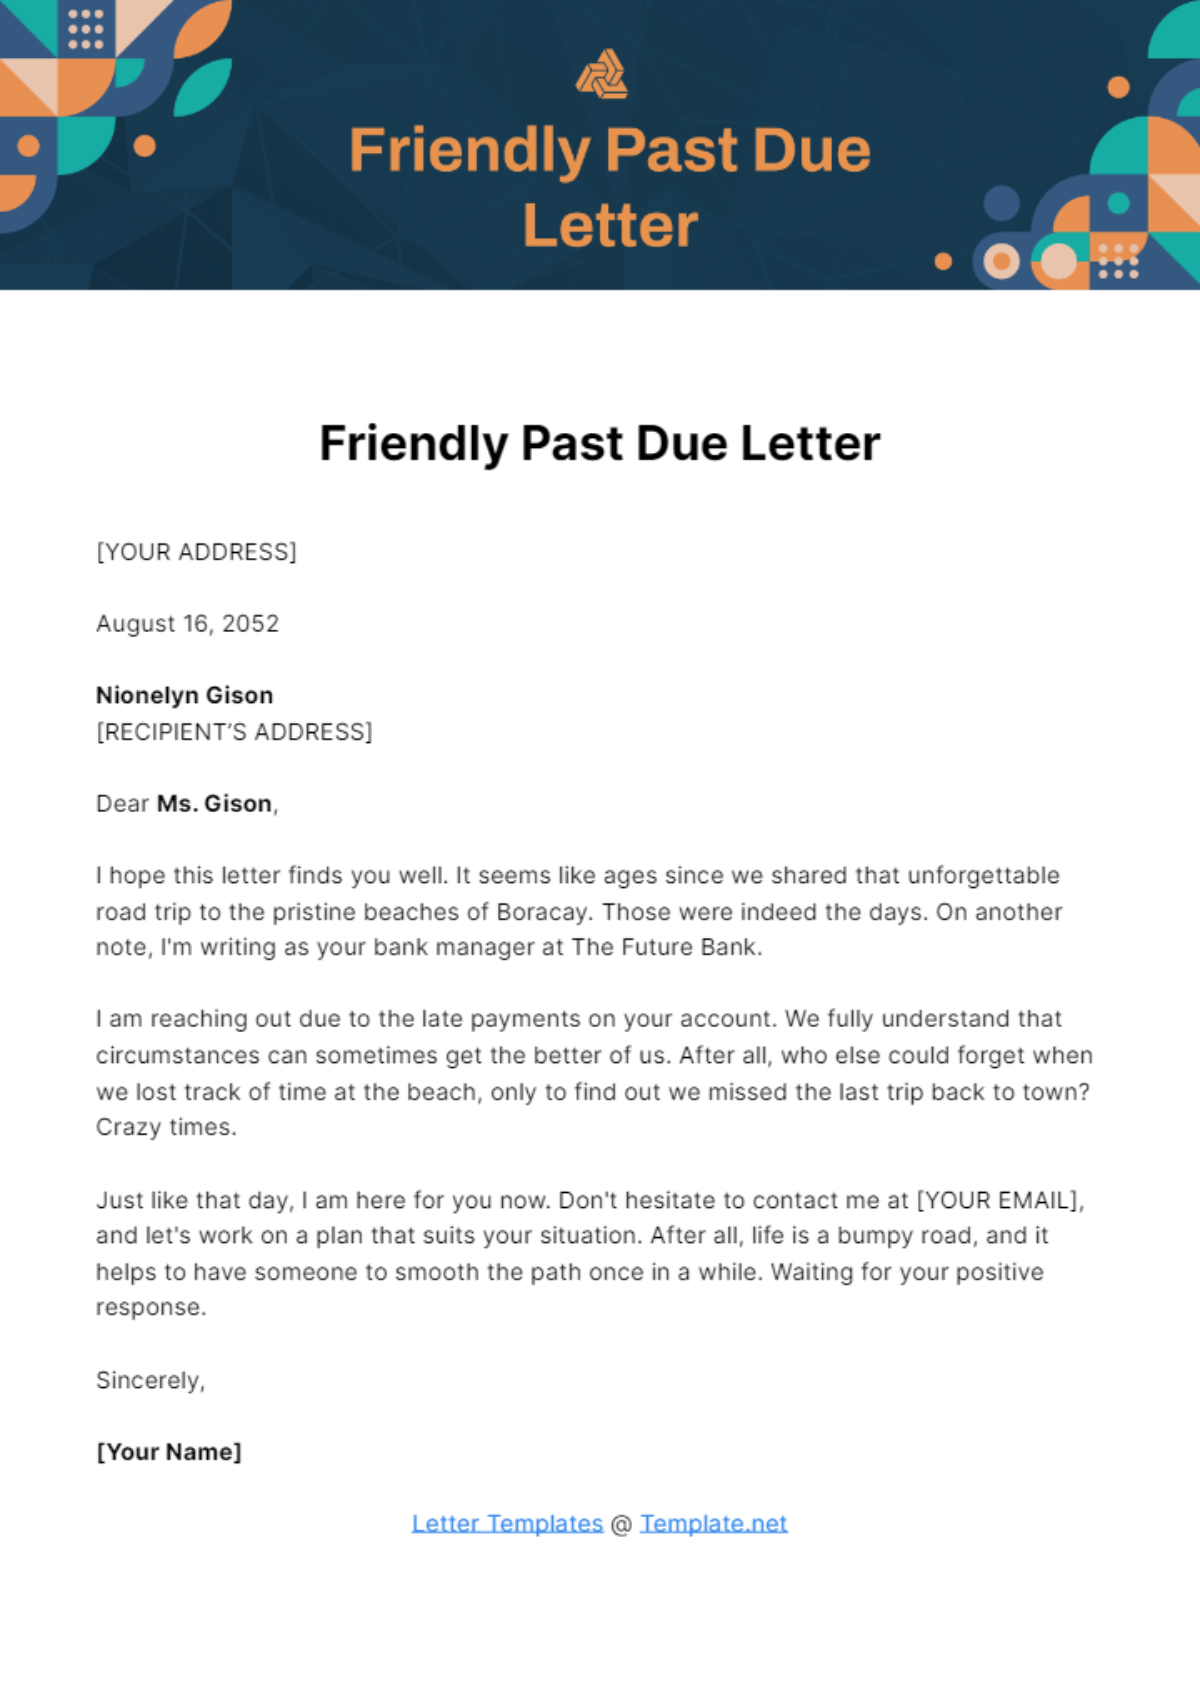 Free Friendly Past Due Letter Template